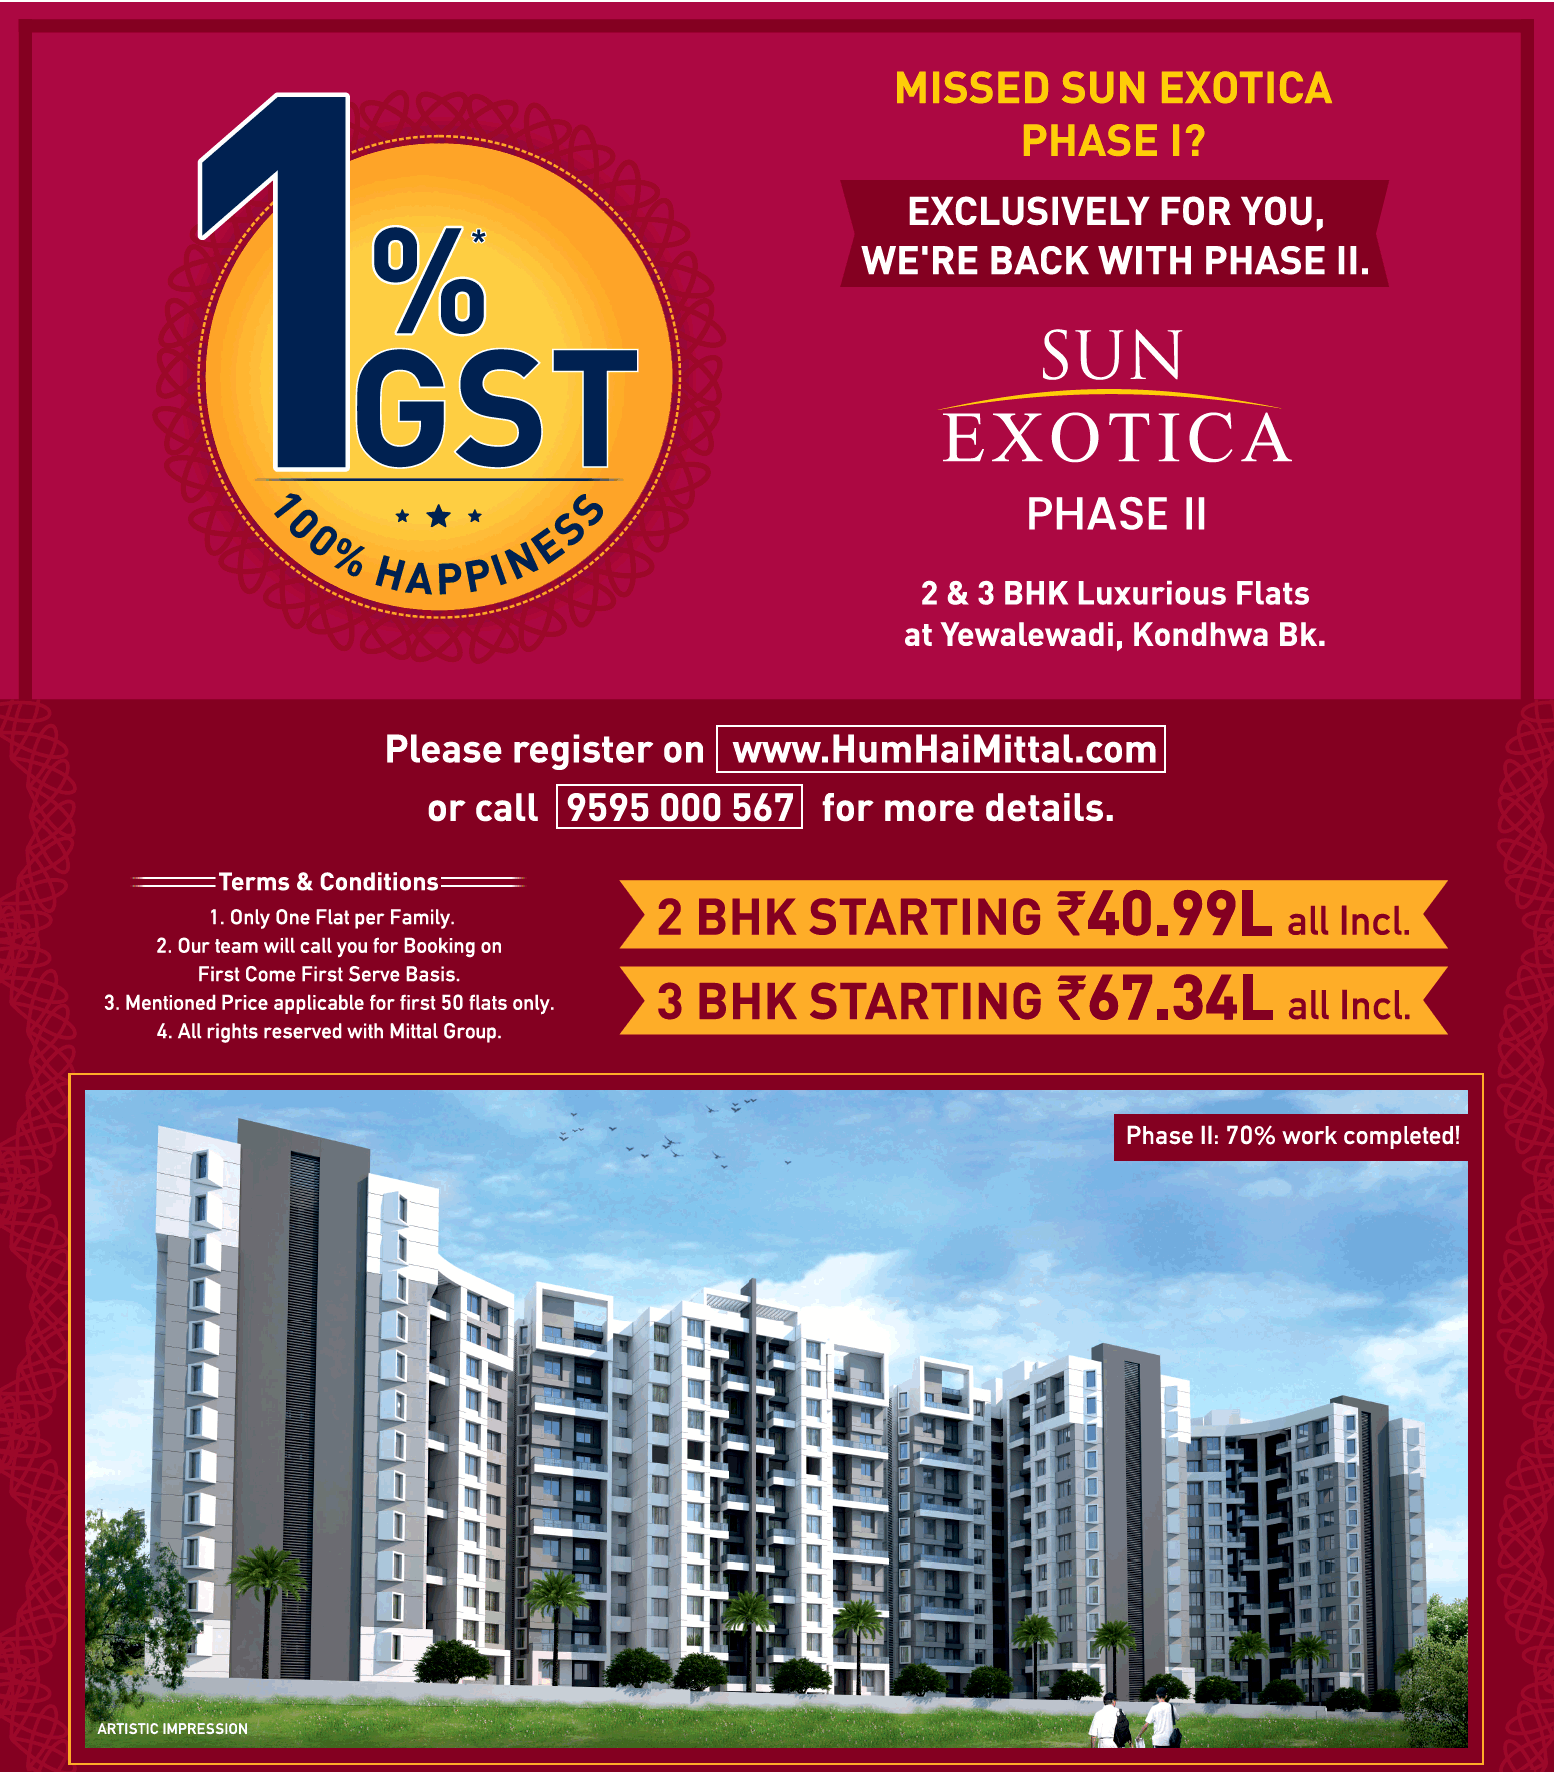 Pay just 1% GST at Mittal Sun Exotica Phase 2 in Pune